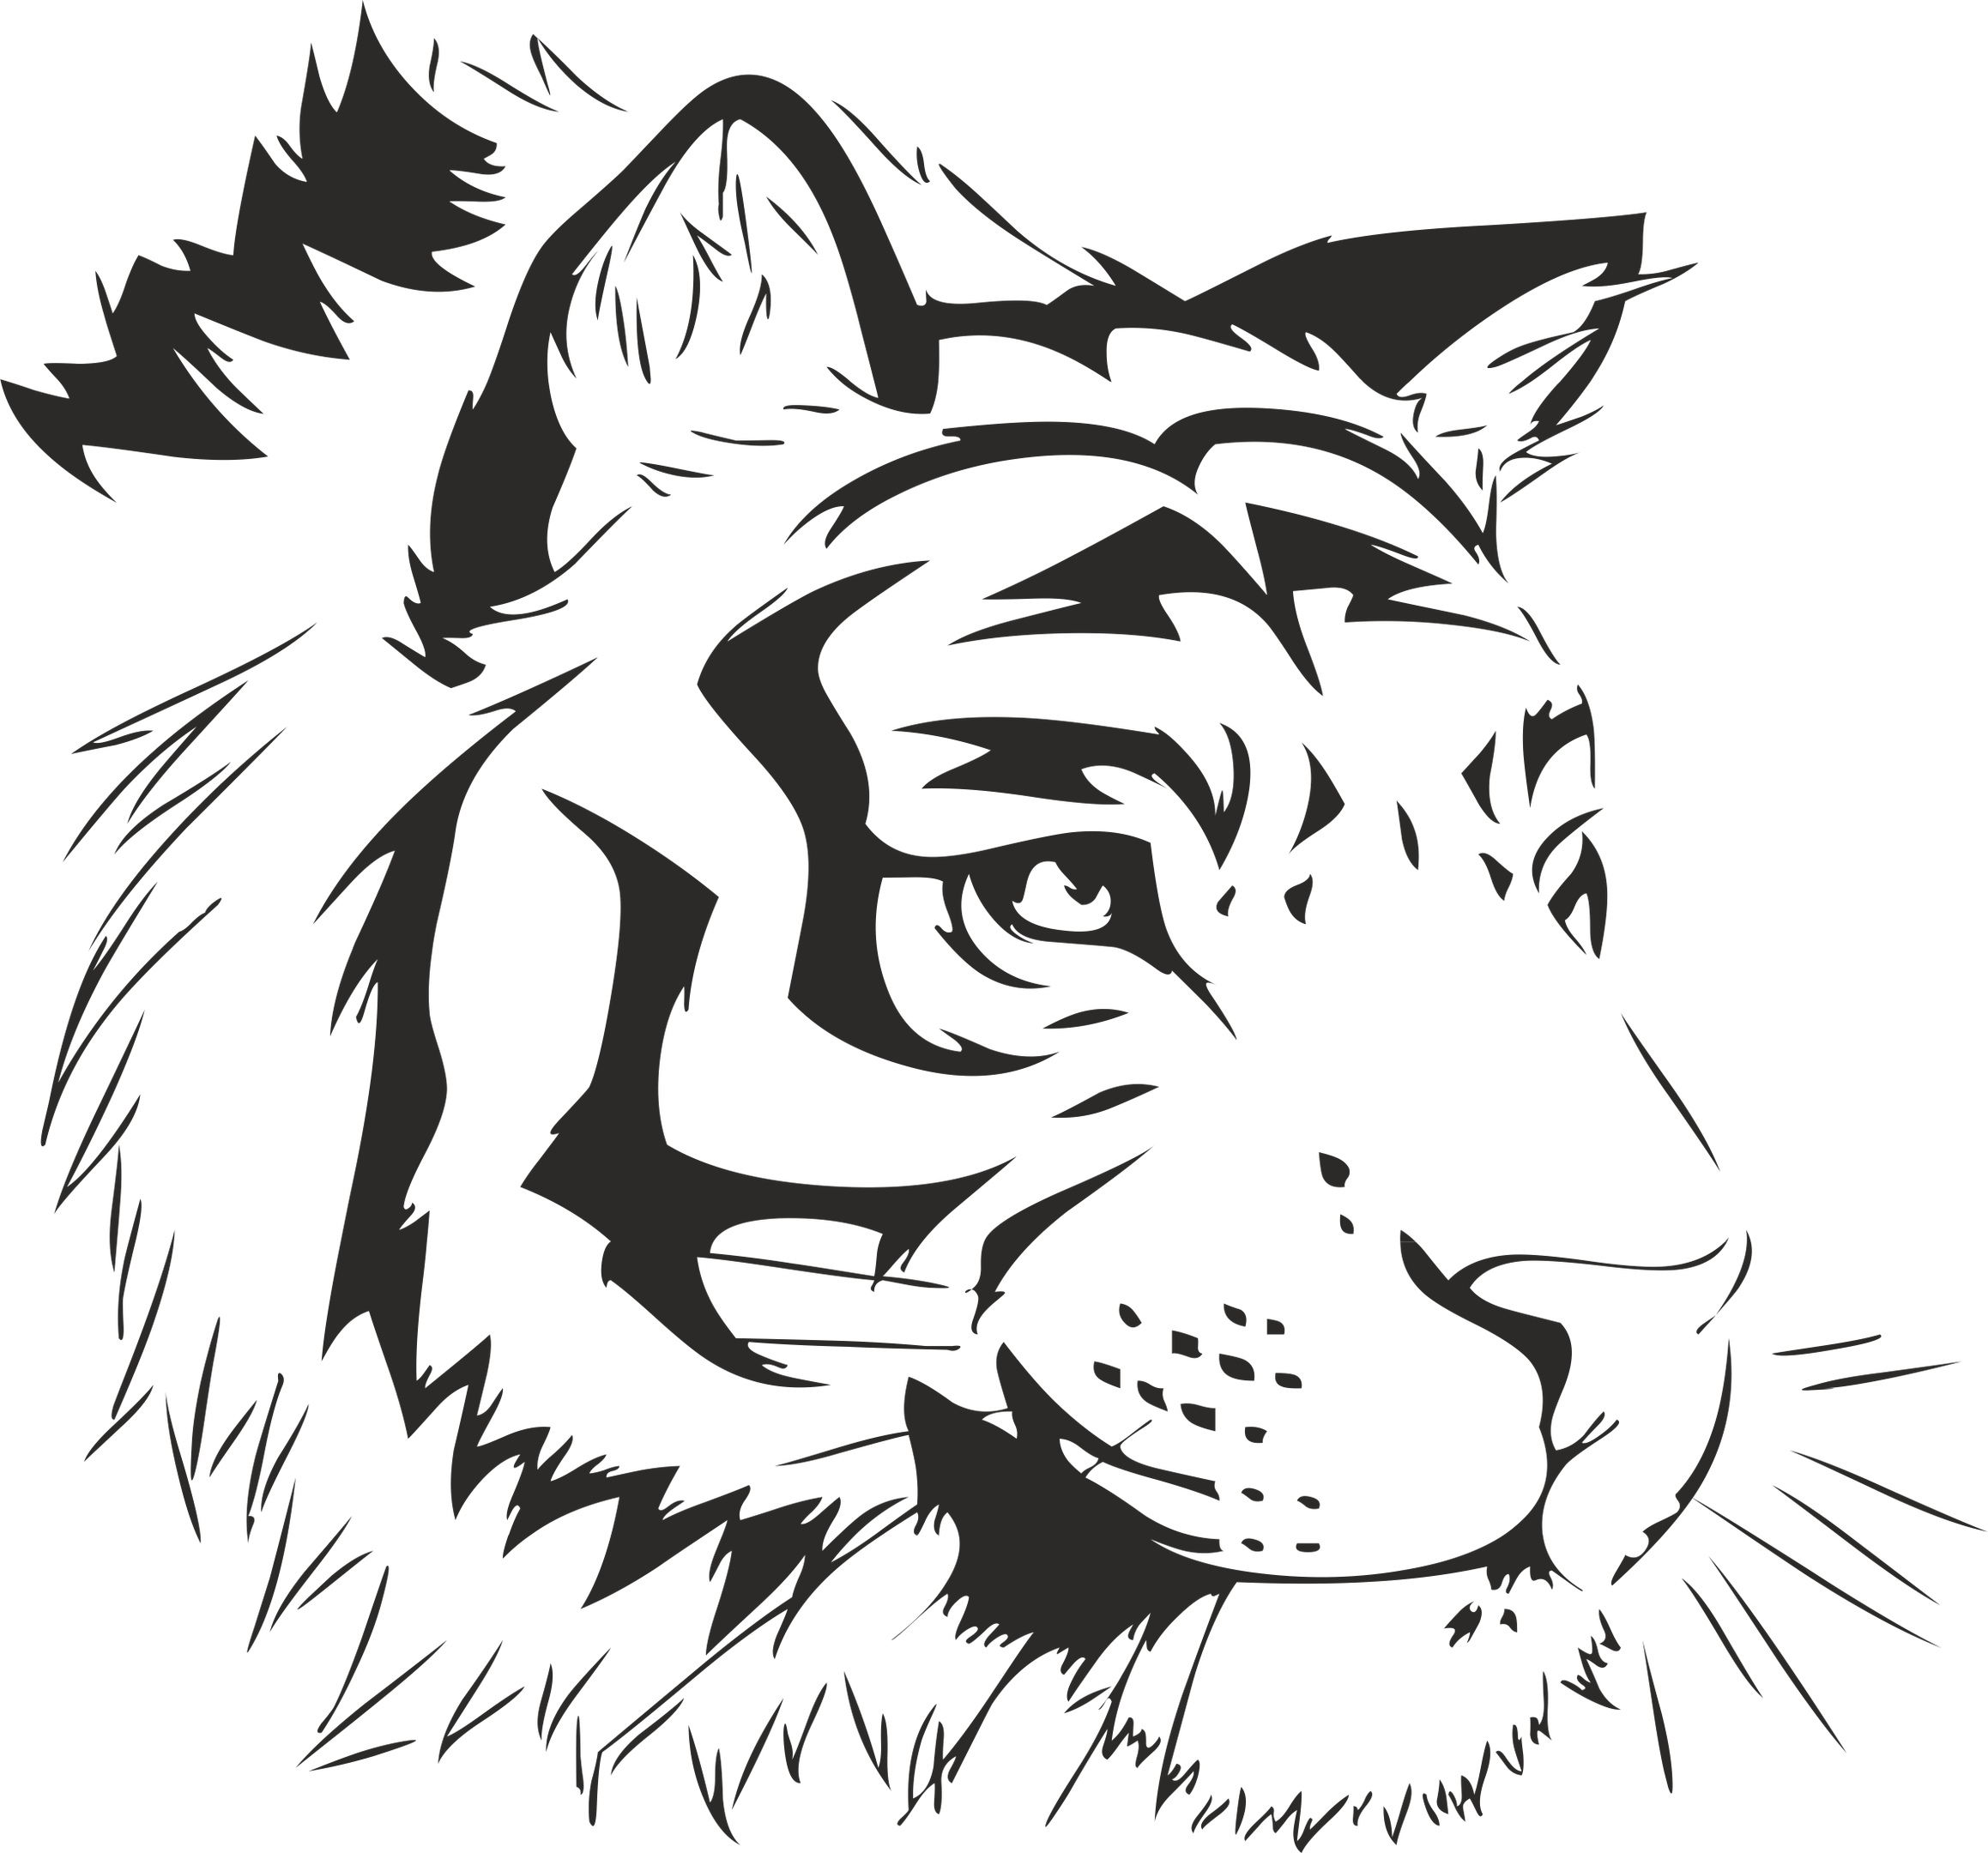 tiger-stencil-sticker-free-vector-cdr-download-3axis-co